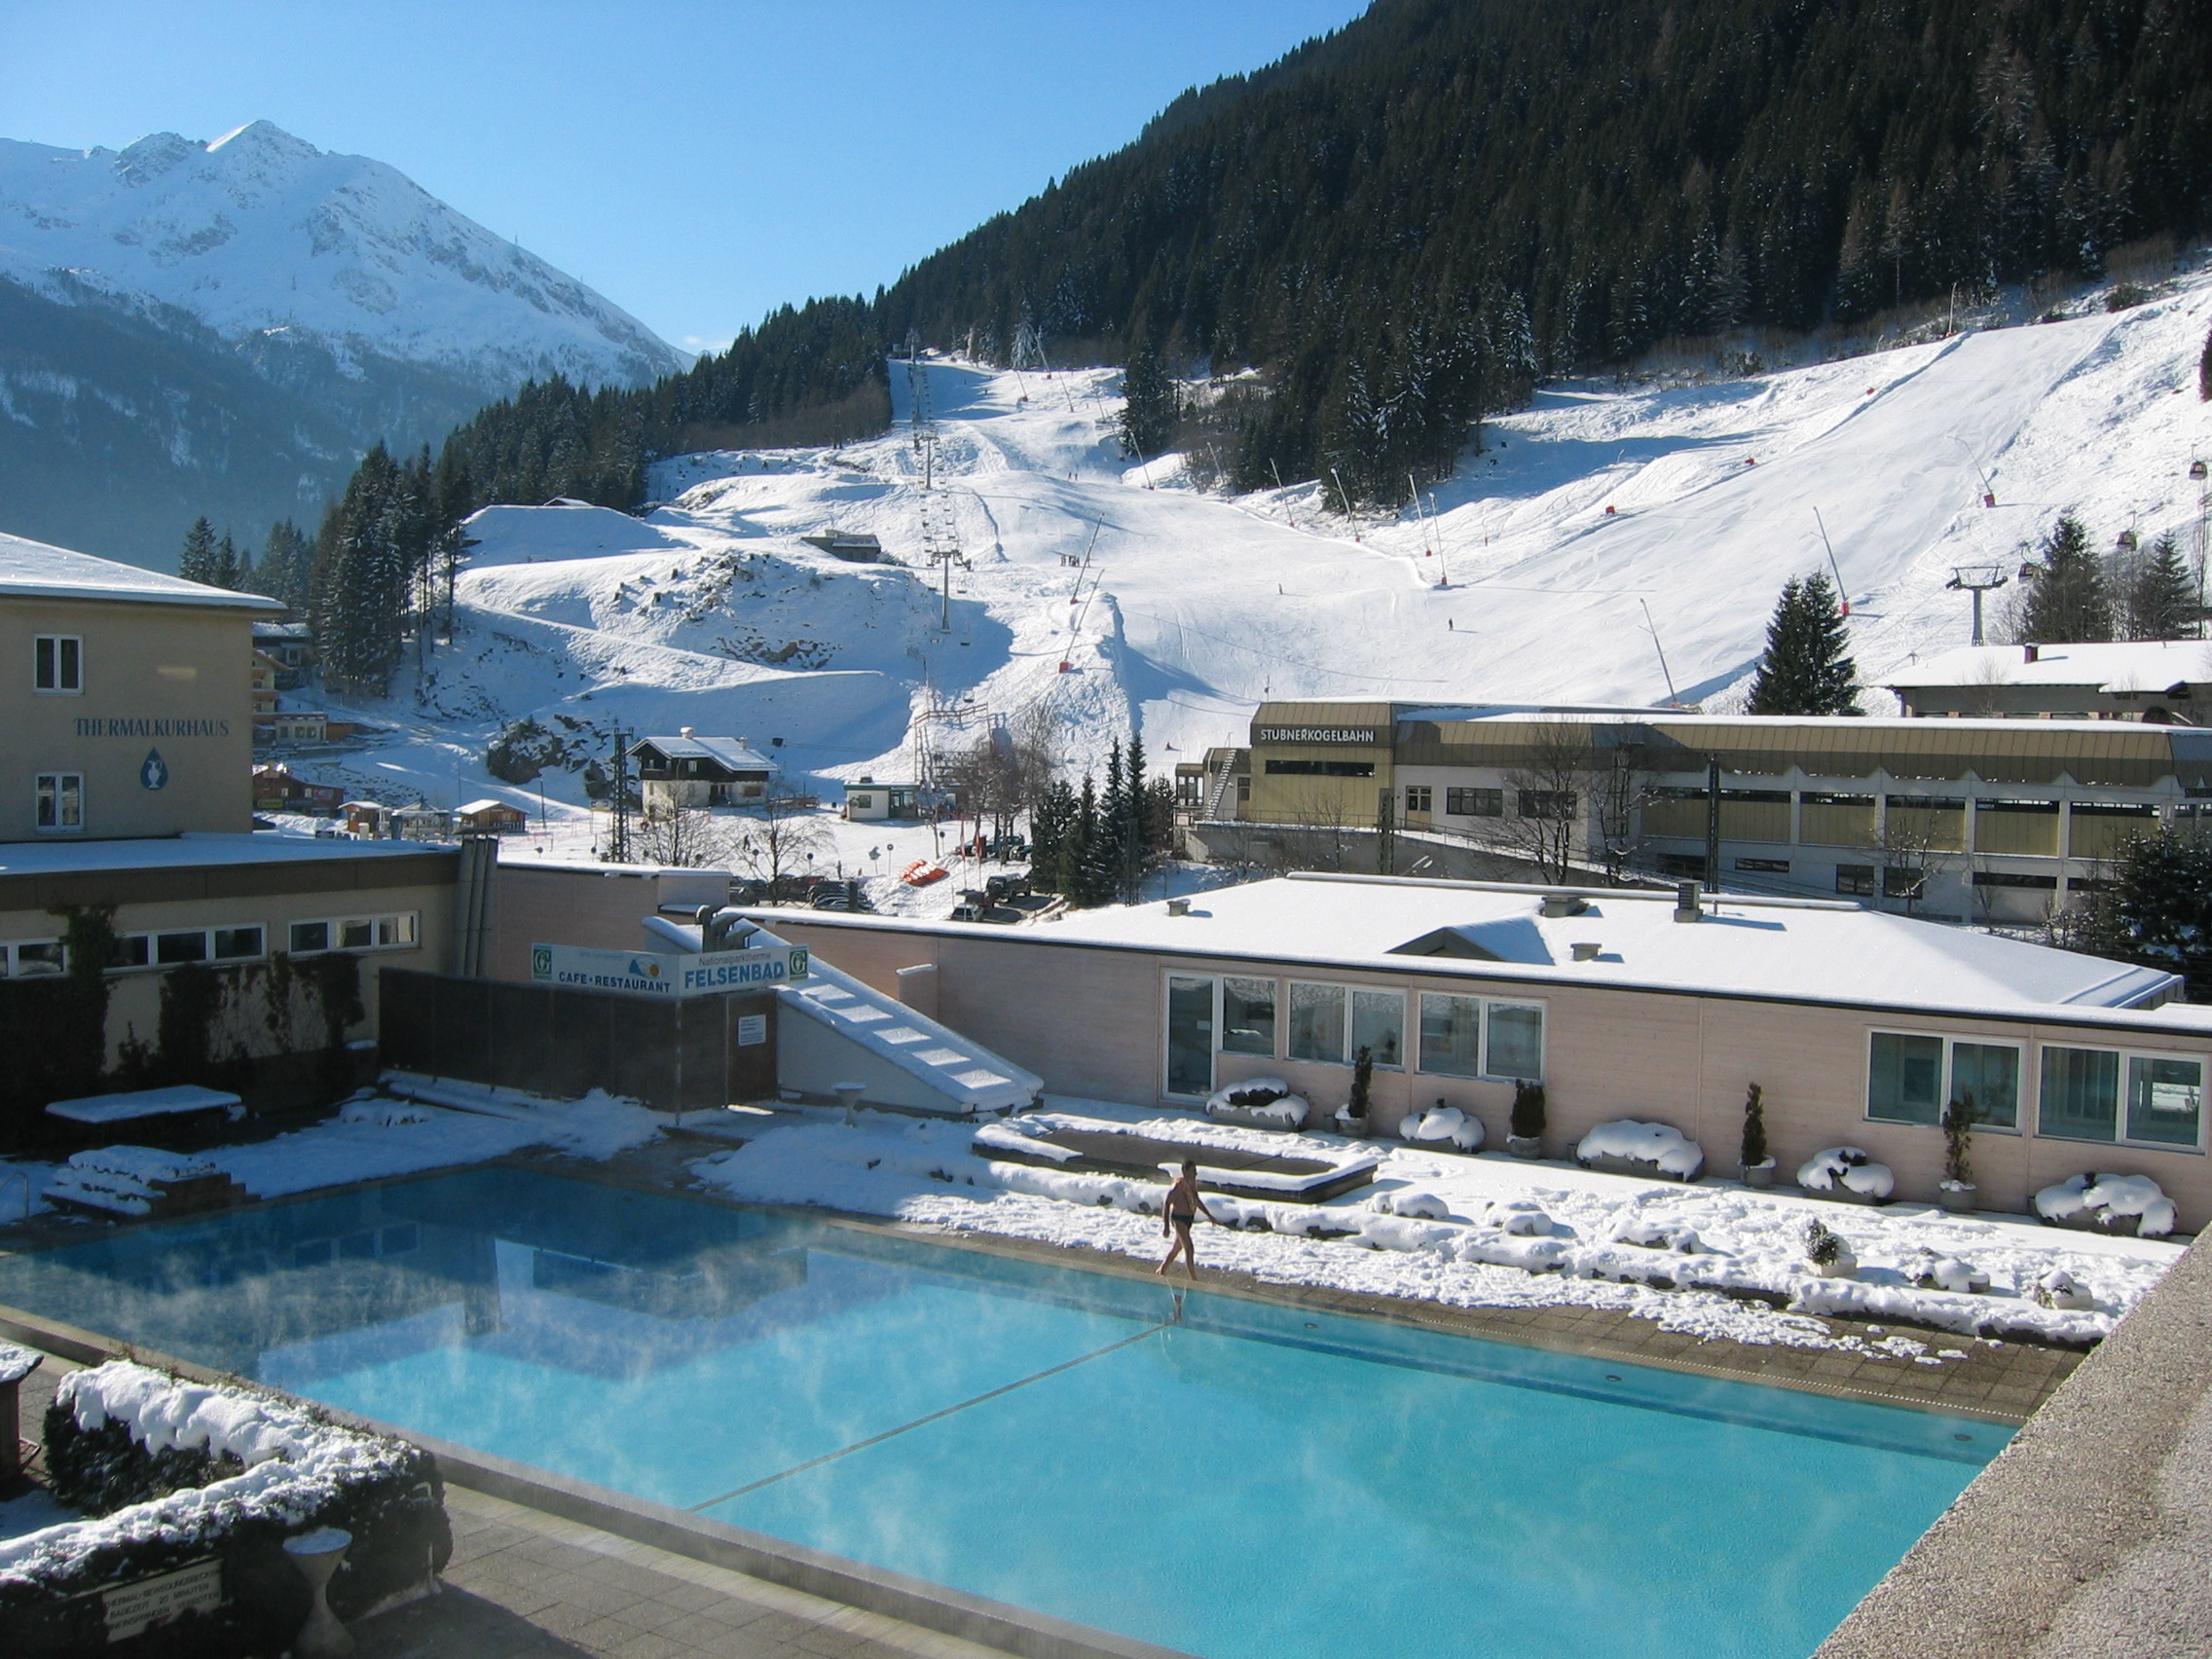 The thermal spa baths in Bad Gastein